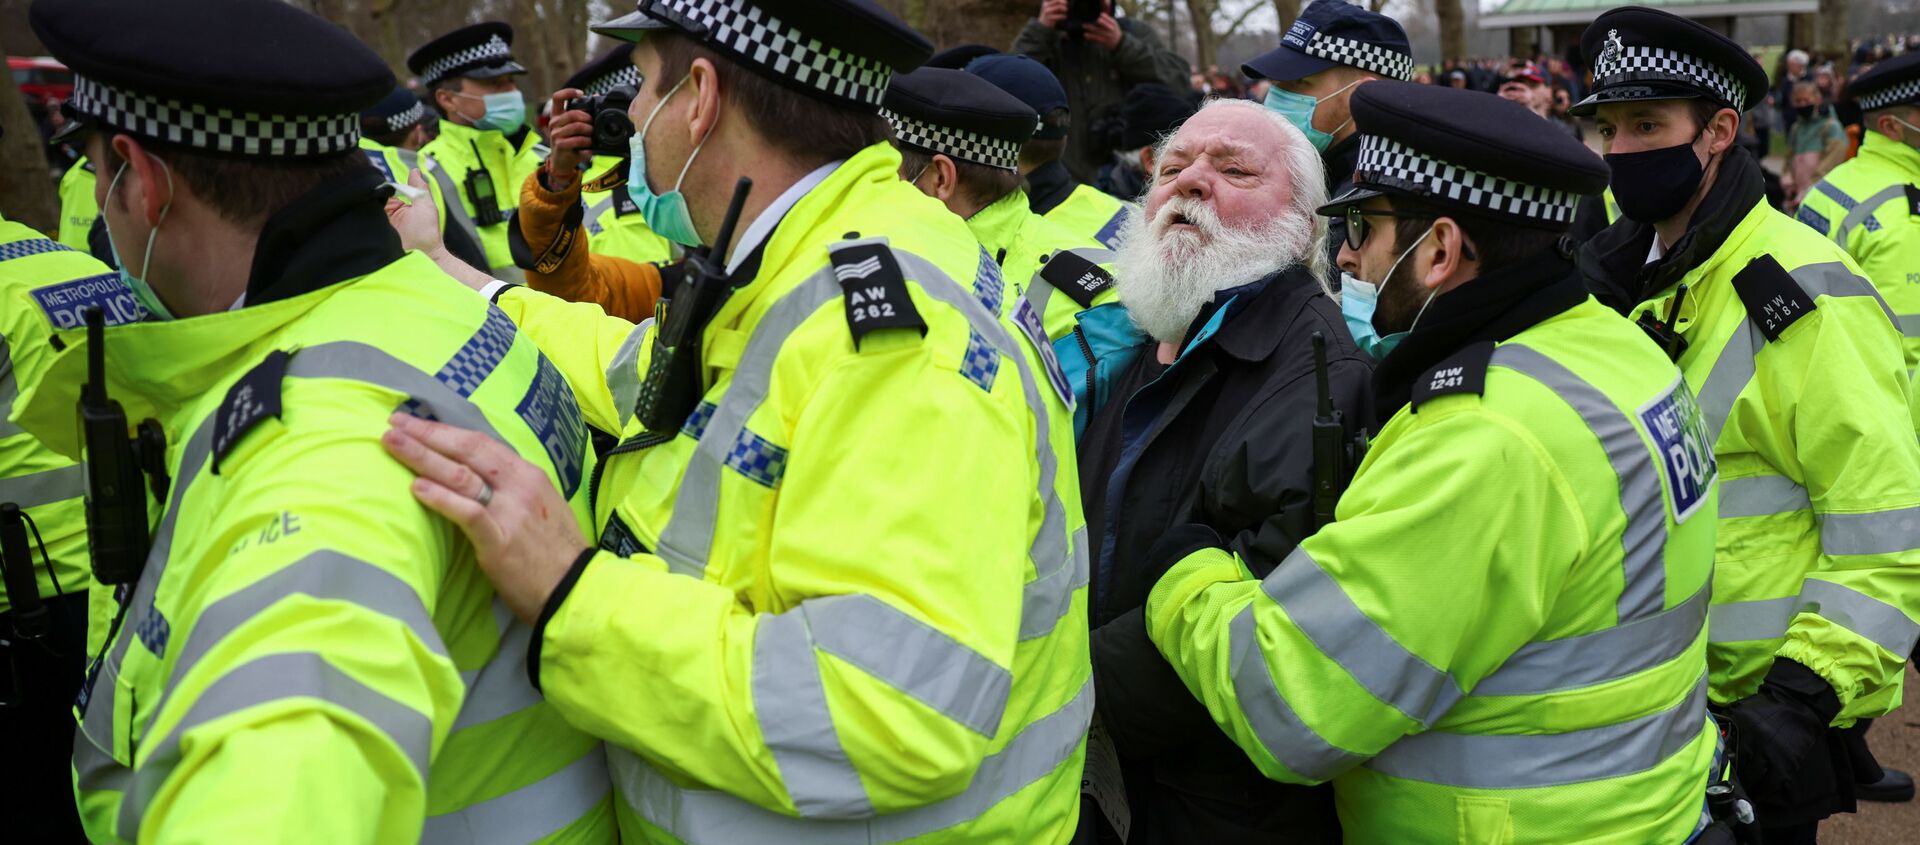 Police officers detain a demonstrator in Hyde Park during a protest against the lockdown, amid the spread of the coronavirus disease (COVID-19), in London, Britain March 20, 2021. - Sputnik International, 1920, 20.03.2021